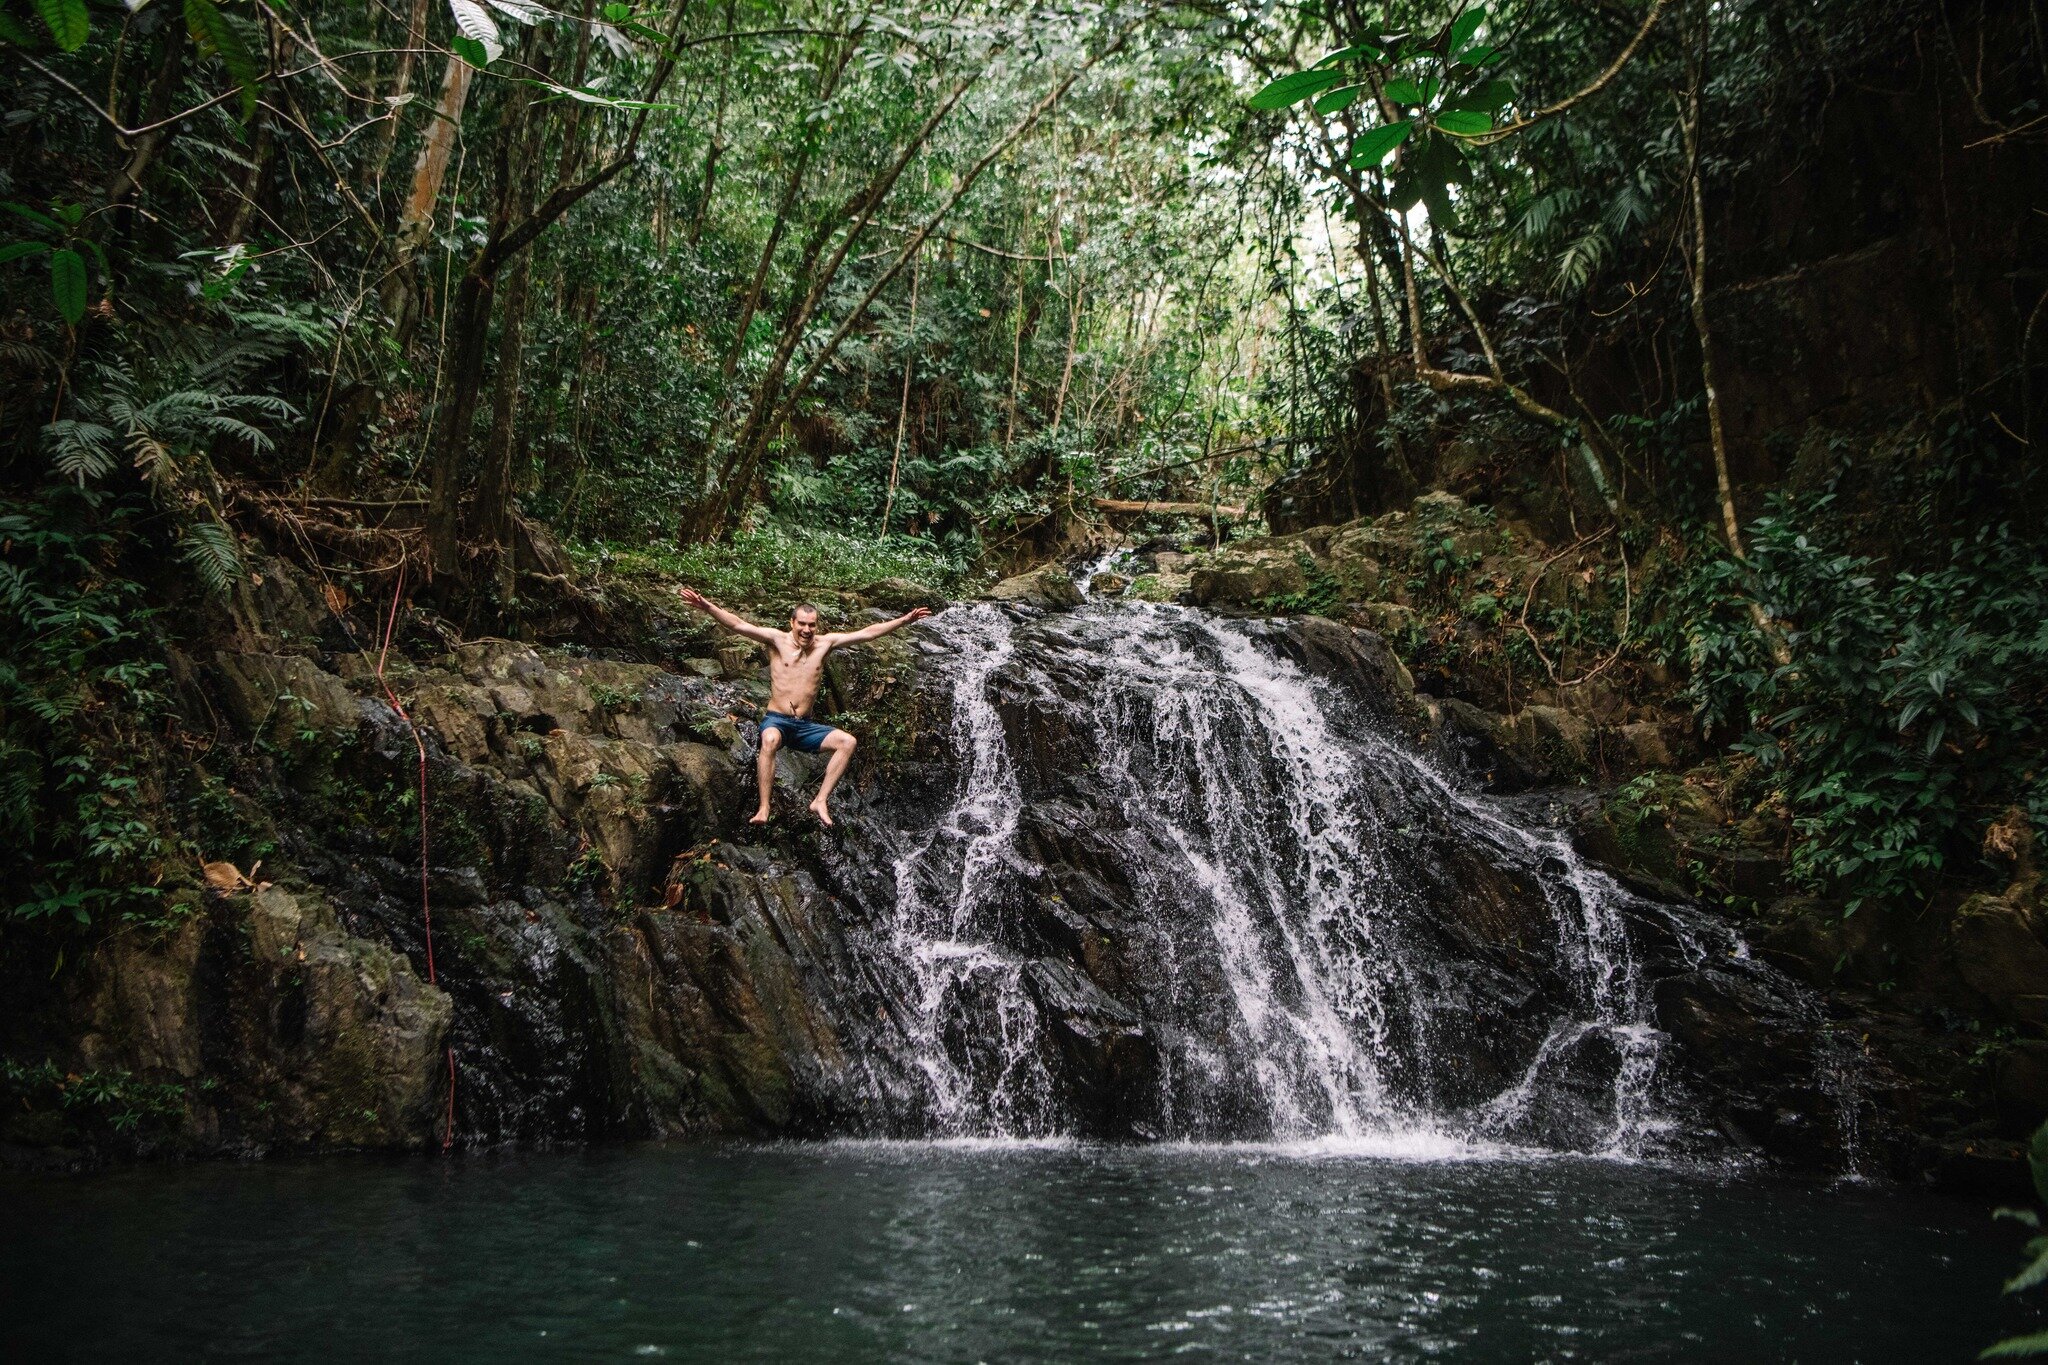 &ldquo;You must go on adventures to find out where you truly belong&rdquo; 
&ndash; Sue Fitzmaurice
#BelizeAwaits #GrabLife 
.
.
Photo &copy;  Dana Halferty  on Instagram 
🏳️&zwj;🌈 Portland, OR by way of Iowa
📷: Travel, food &amp; lifestyle photog